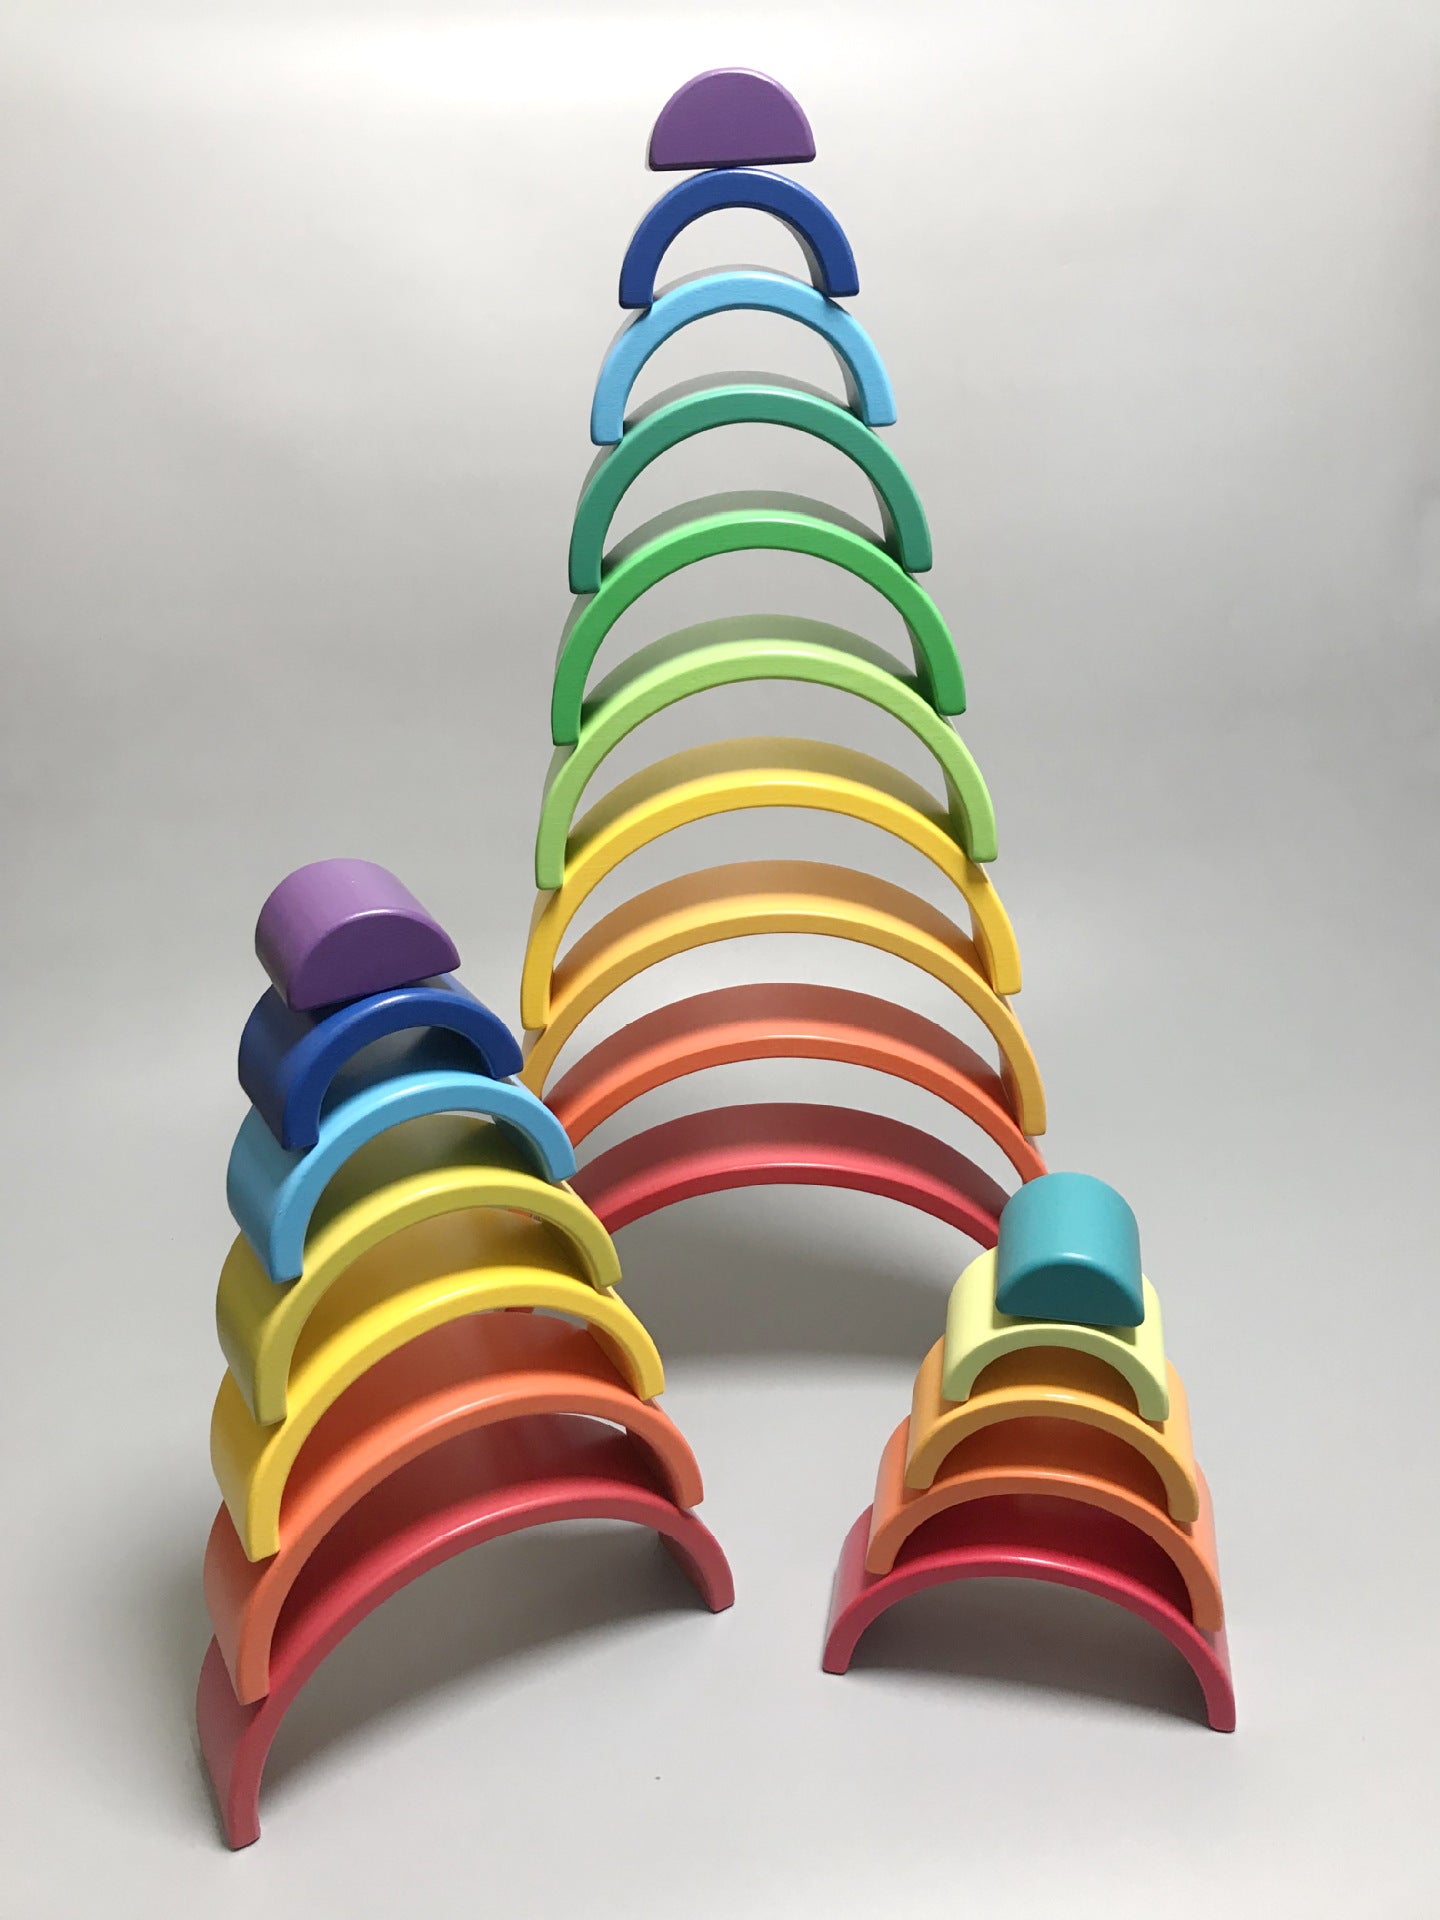 Prism Play Superior Beech Rainbow - 5 Pcs - Wooden Rainbow Stacker - Small Size